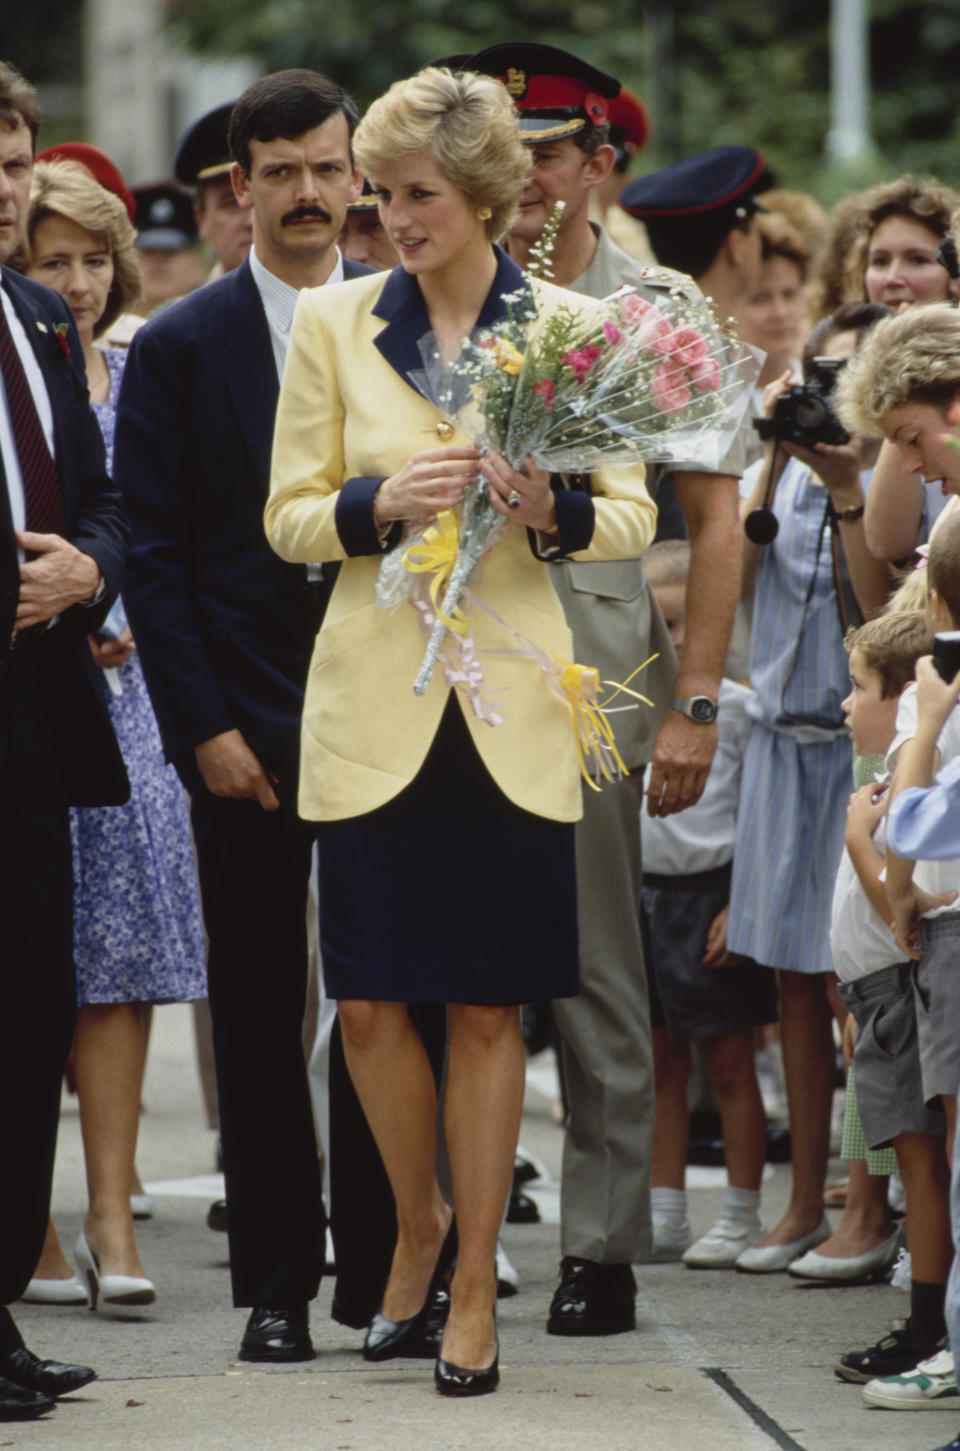 British Royal Diana, Princess of Wales (1961-1997), wearing a yellow-and-navy blue Catherine Walker suit with gold buttons, during a visit to Tamar, a British Forces shore base in Hong Kong, 8th November 1989. Diana and her husband Charles are on a three-day visit to Hong Kong. (Photo by Tim Graham Photo Library via Getty Images)